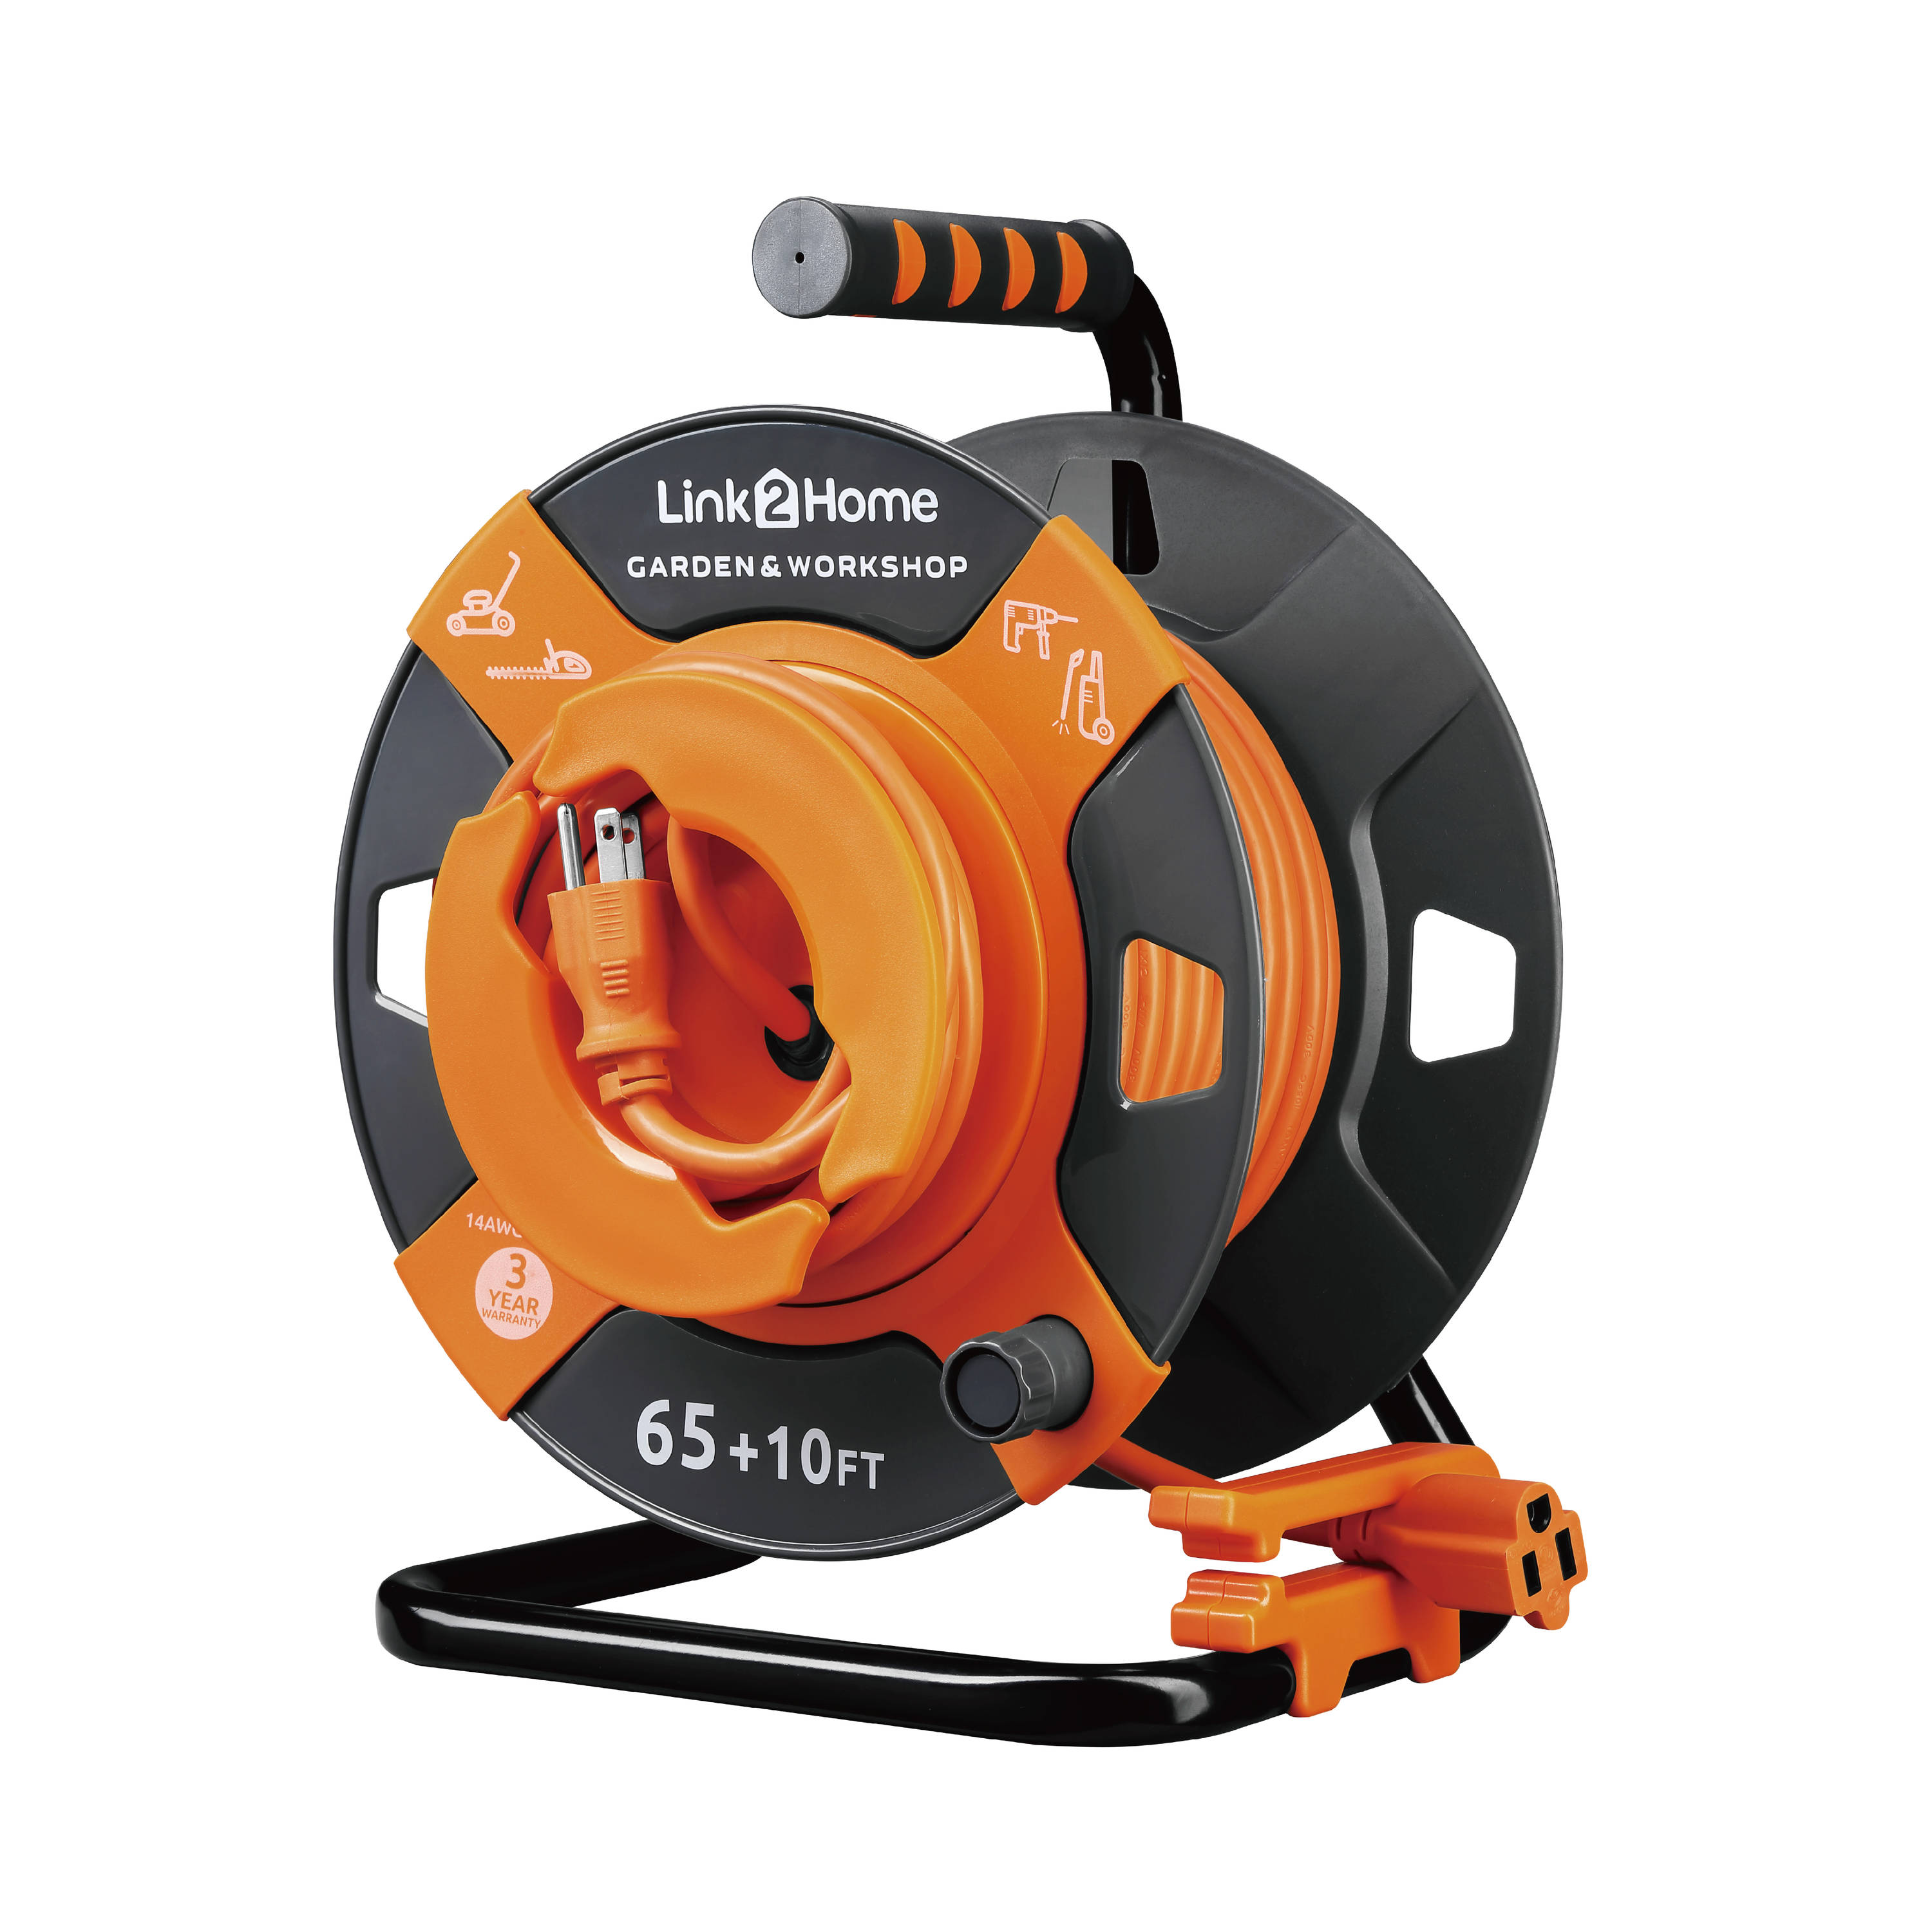 LINK2HOME Cord Reel Power Management 80-ft 14/3 3-Prong Indoor/Outdoor SJTW  Medium Duty General Extension Cord in the Extension Cord Accessories  department at